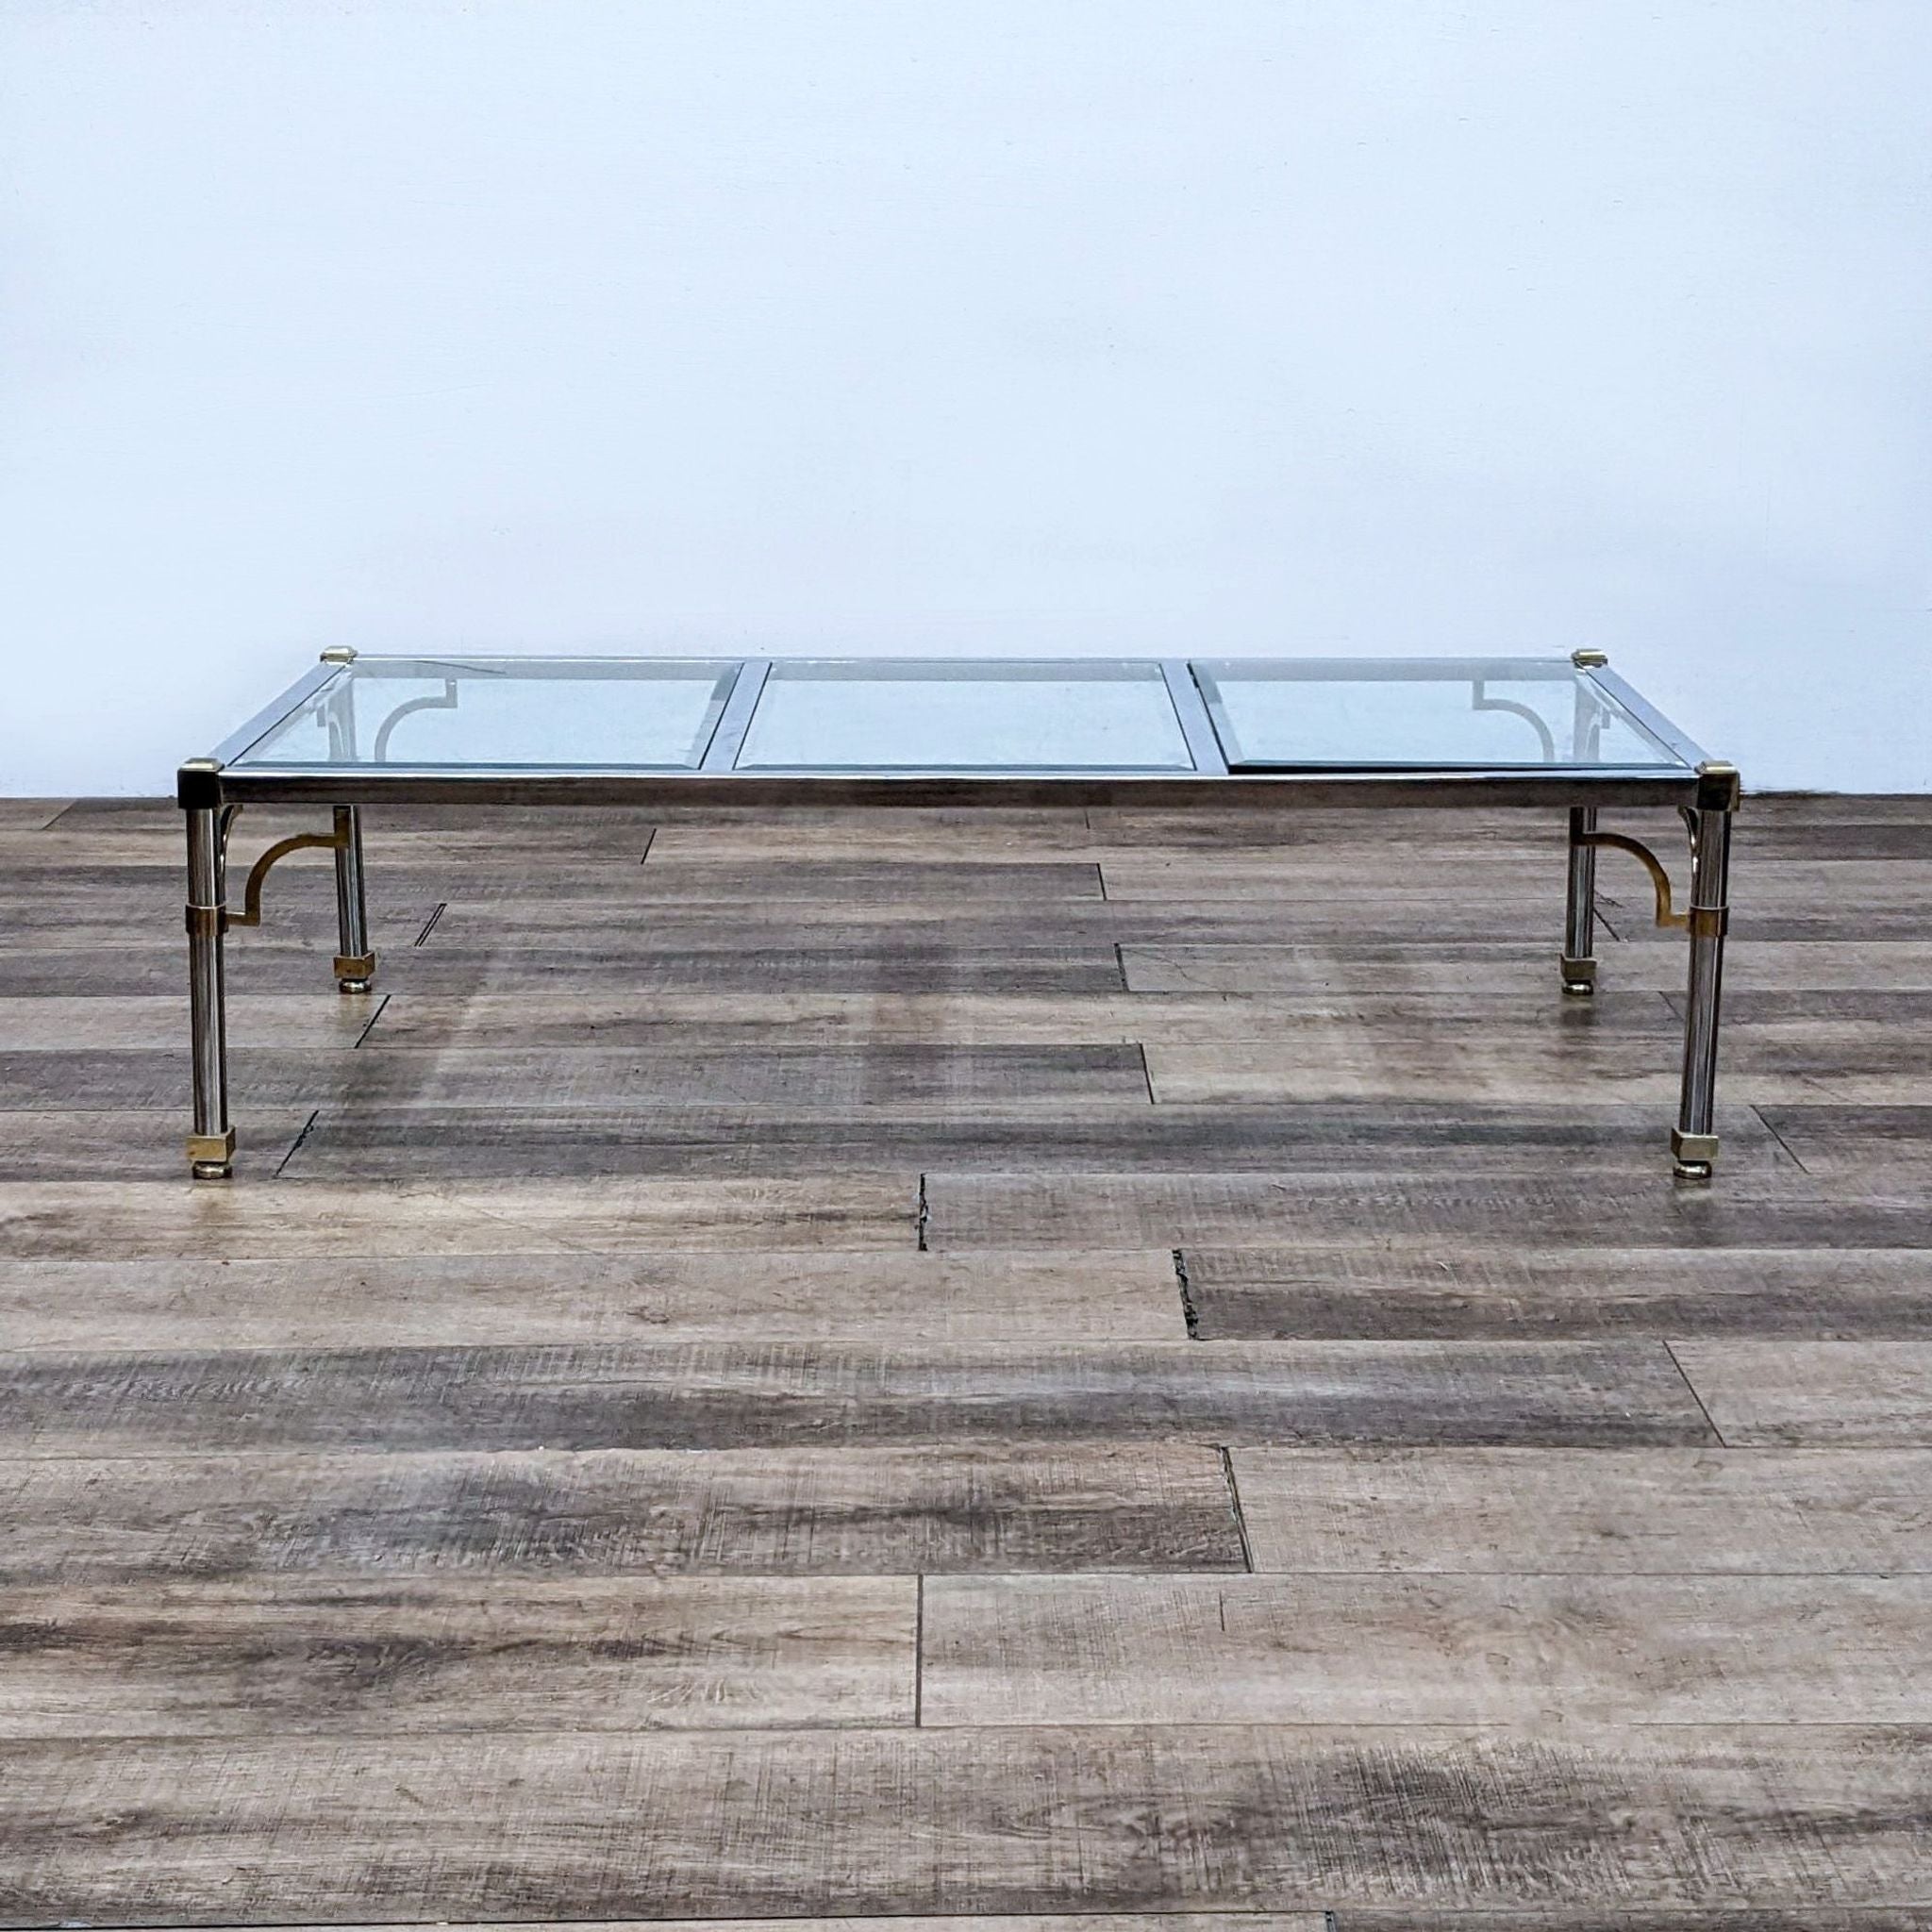 Rectangular Reperch coffee table with glass top and gold accents on legs against wooden floor.